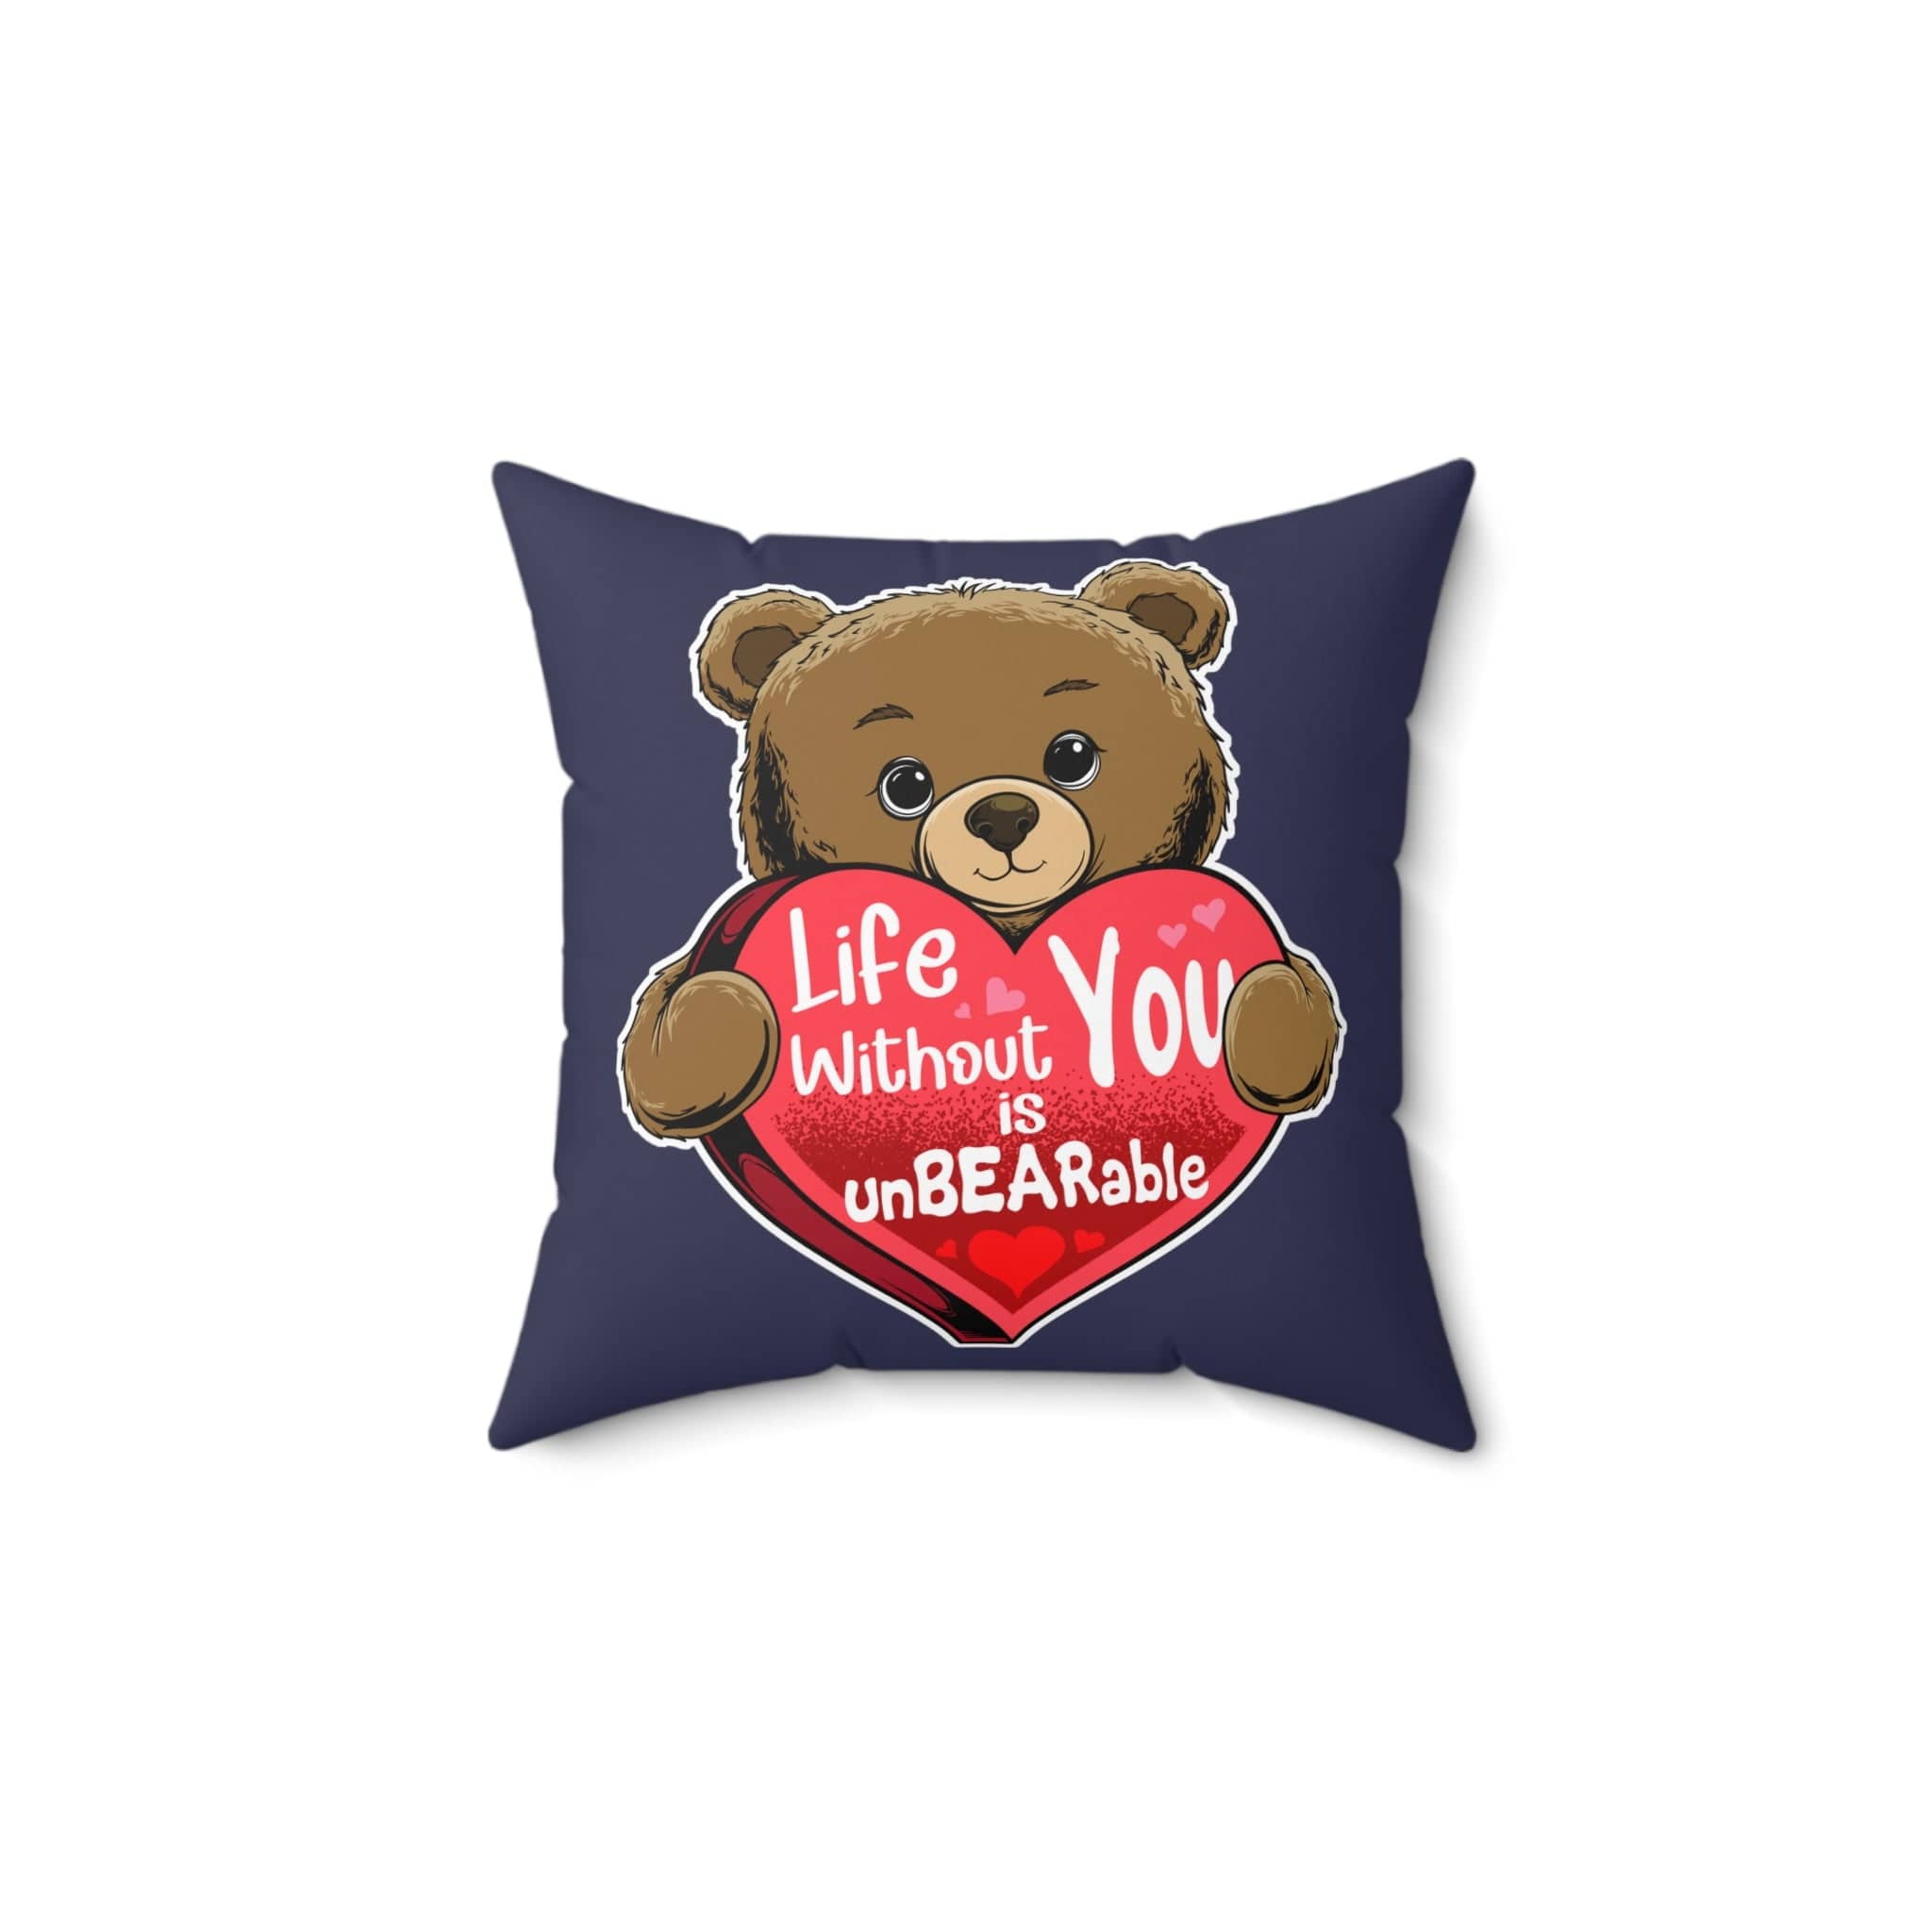 Life Without You Is UnBEARable Pillow color: Martinique